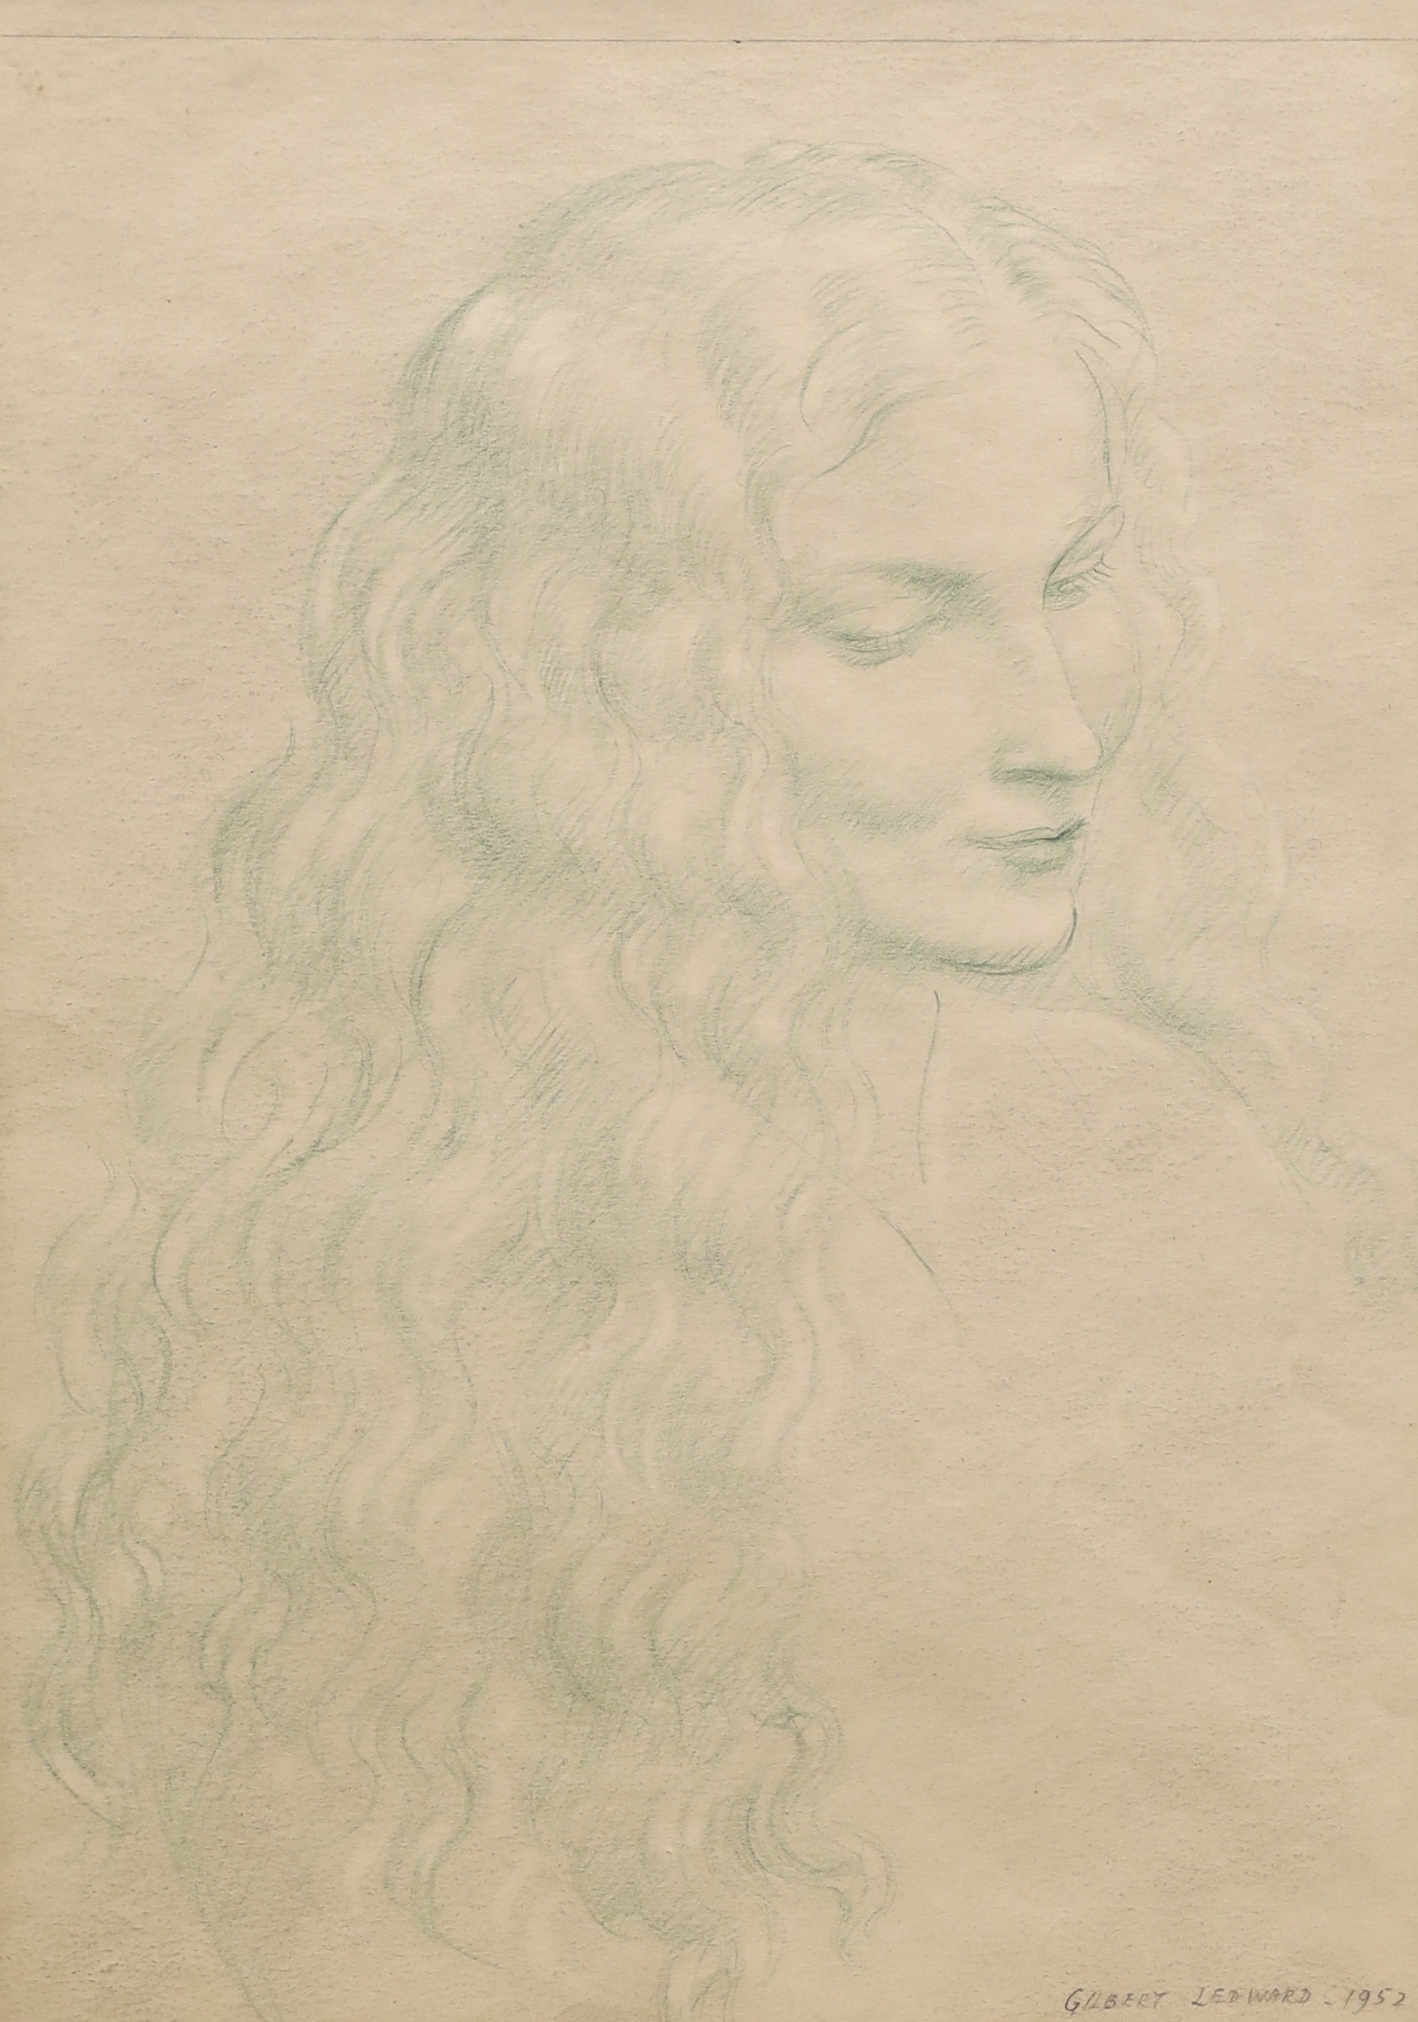 Gilbert Ledward (1888-1960), chalk on paper, 'Study for a Madonna' for the Sloane Square fountain,